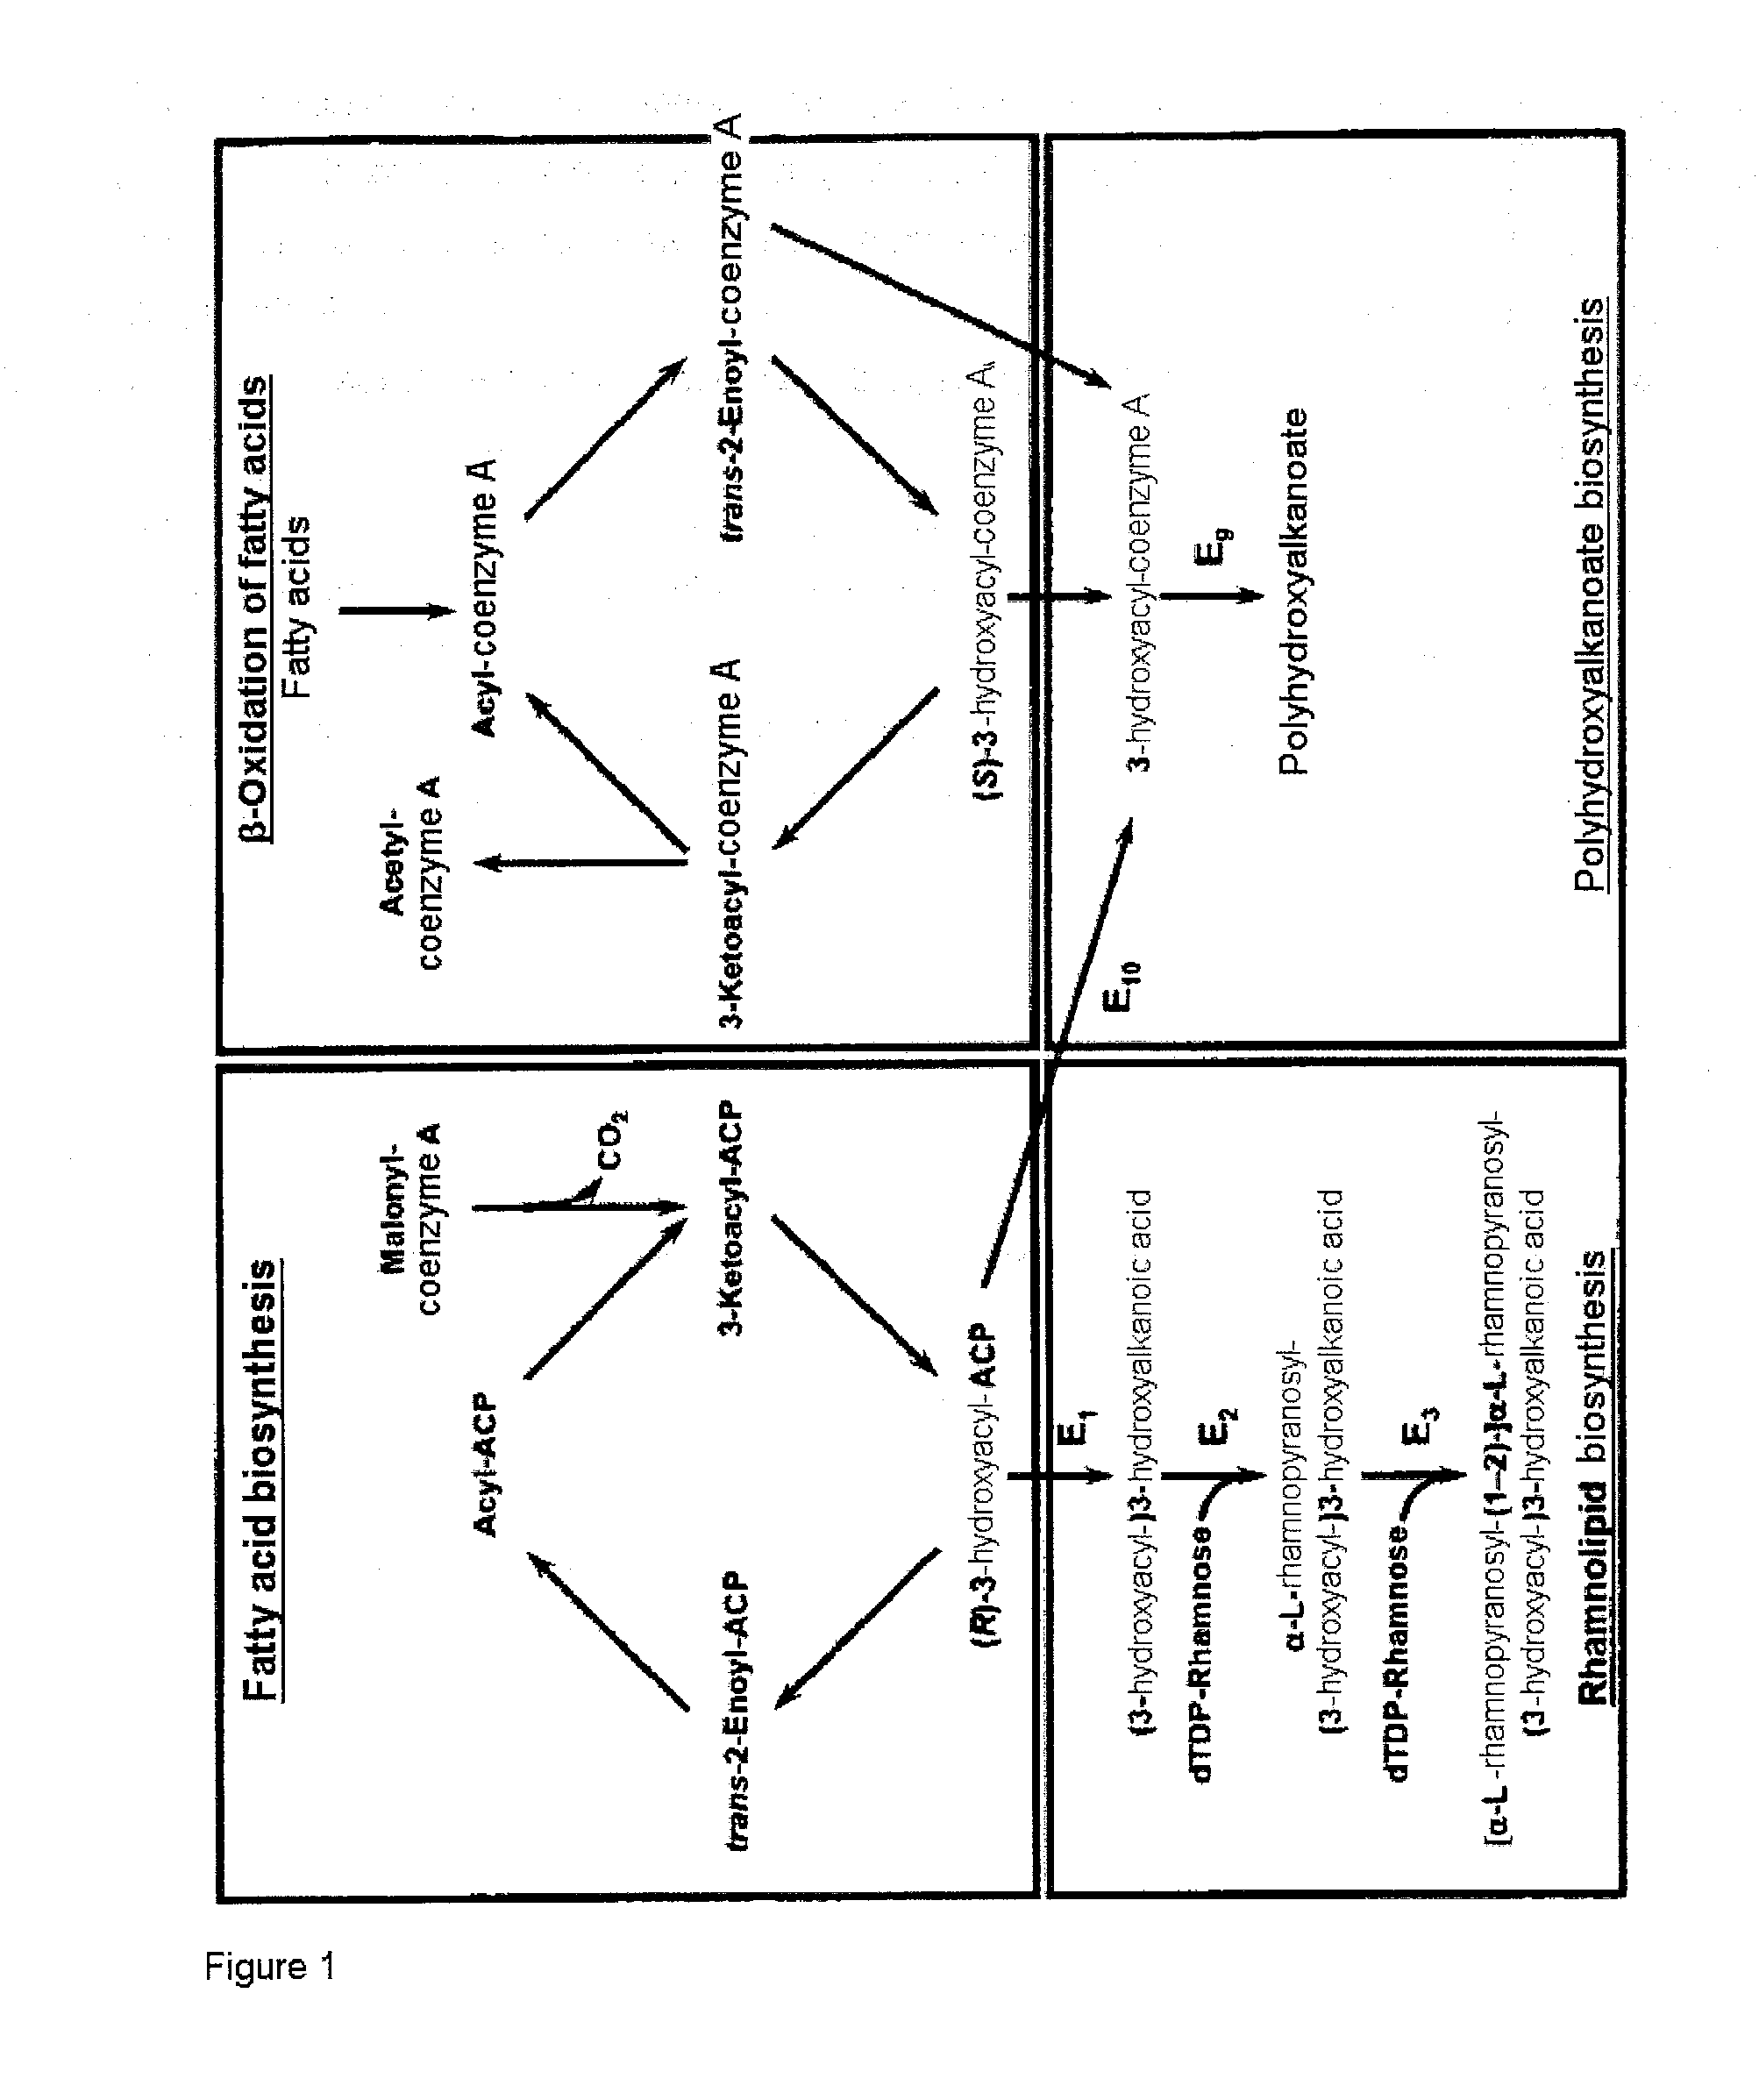 Cells and methods for producing rhamnolipids